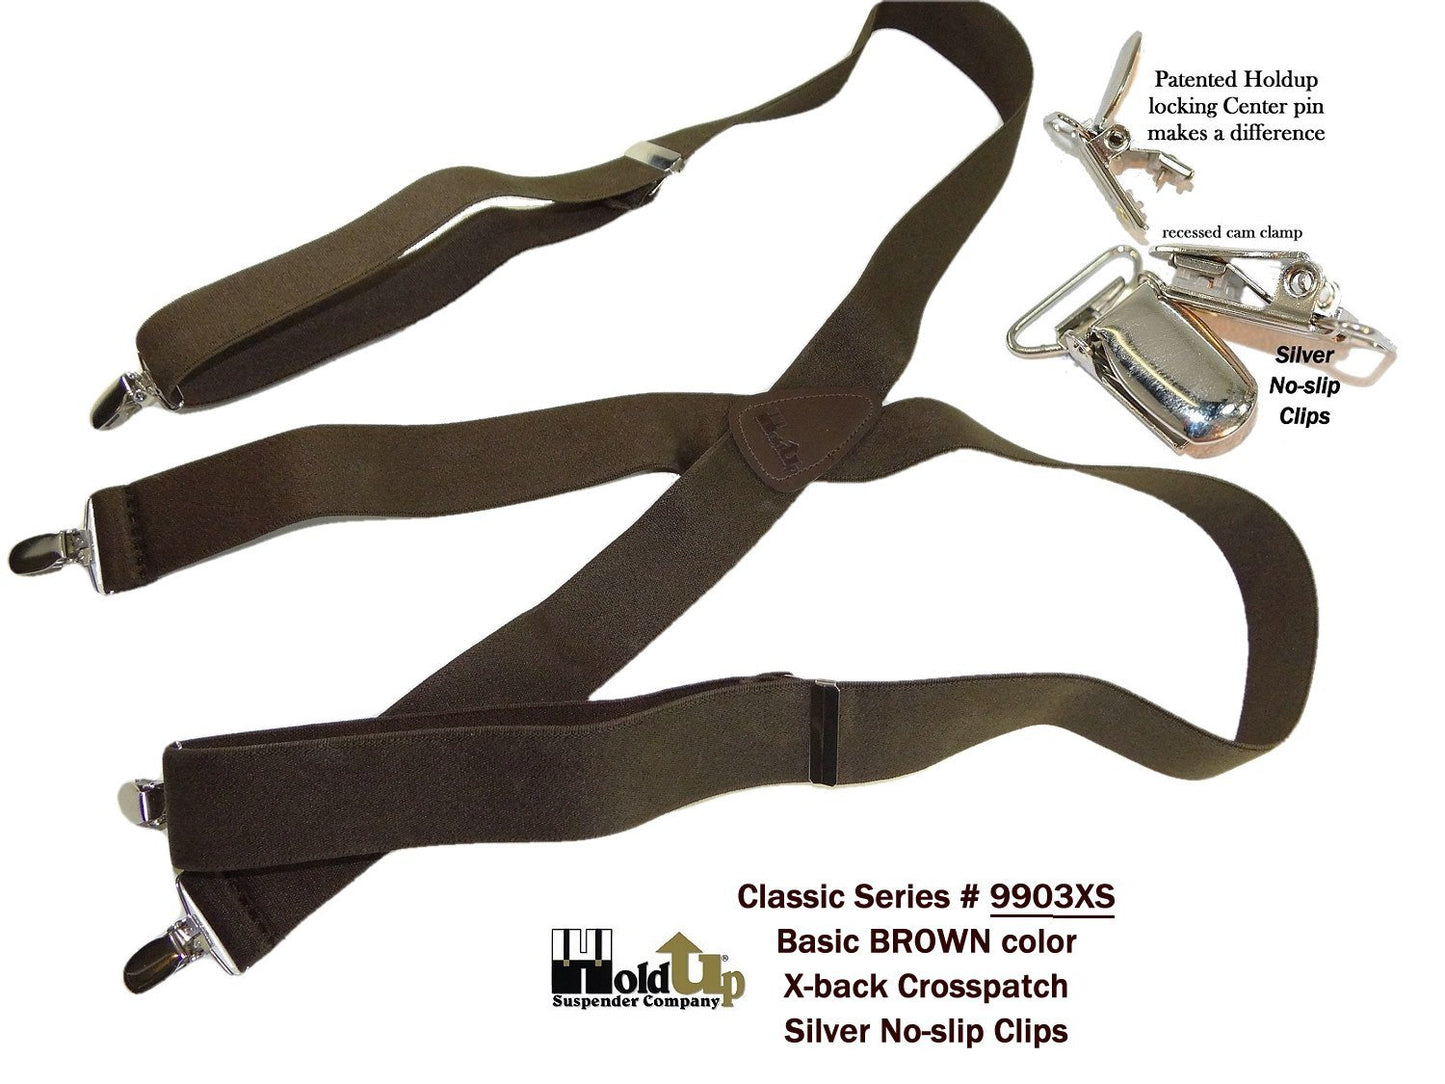 Hold-Ups Classic Dark Brown Suspenders with Silver No-slip Clips and X-back Leat